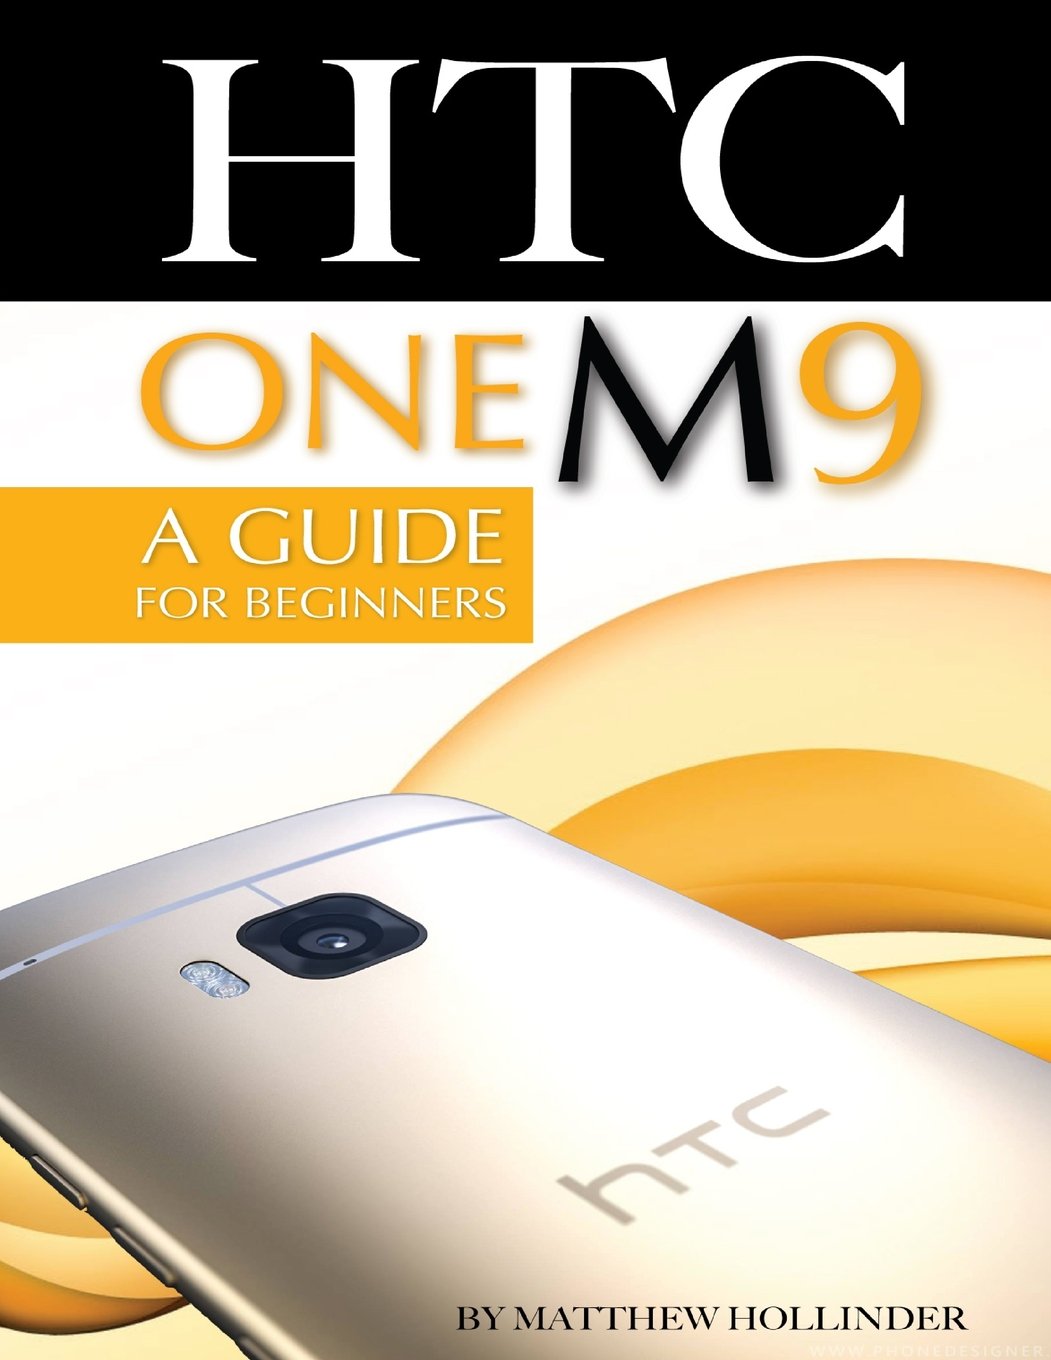 Htc One M9: A Guide For Beginners